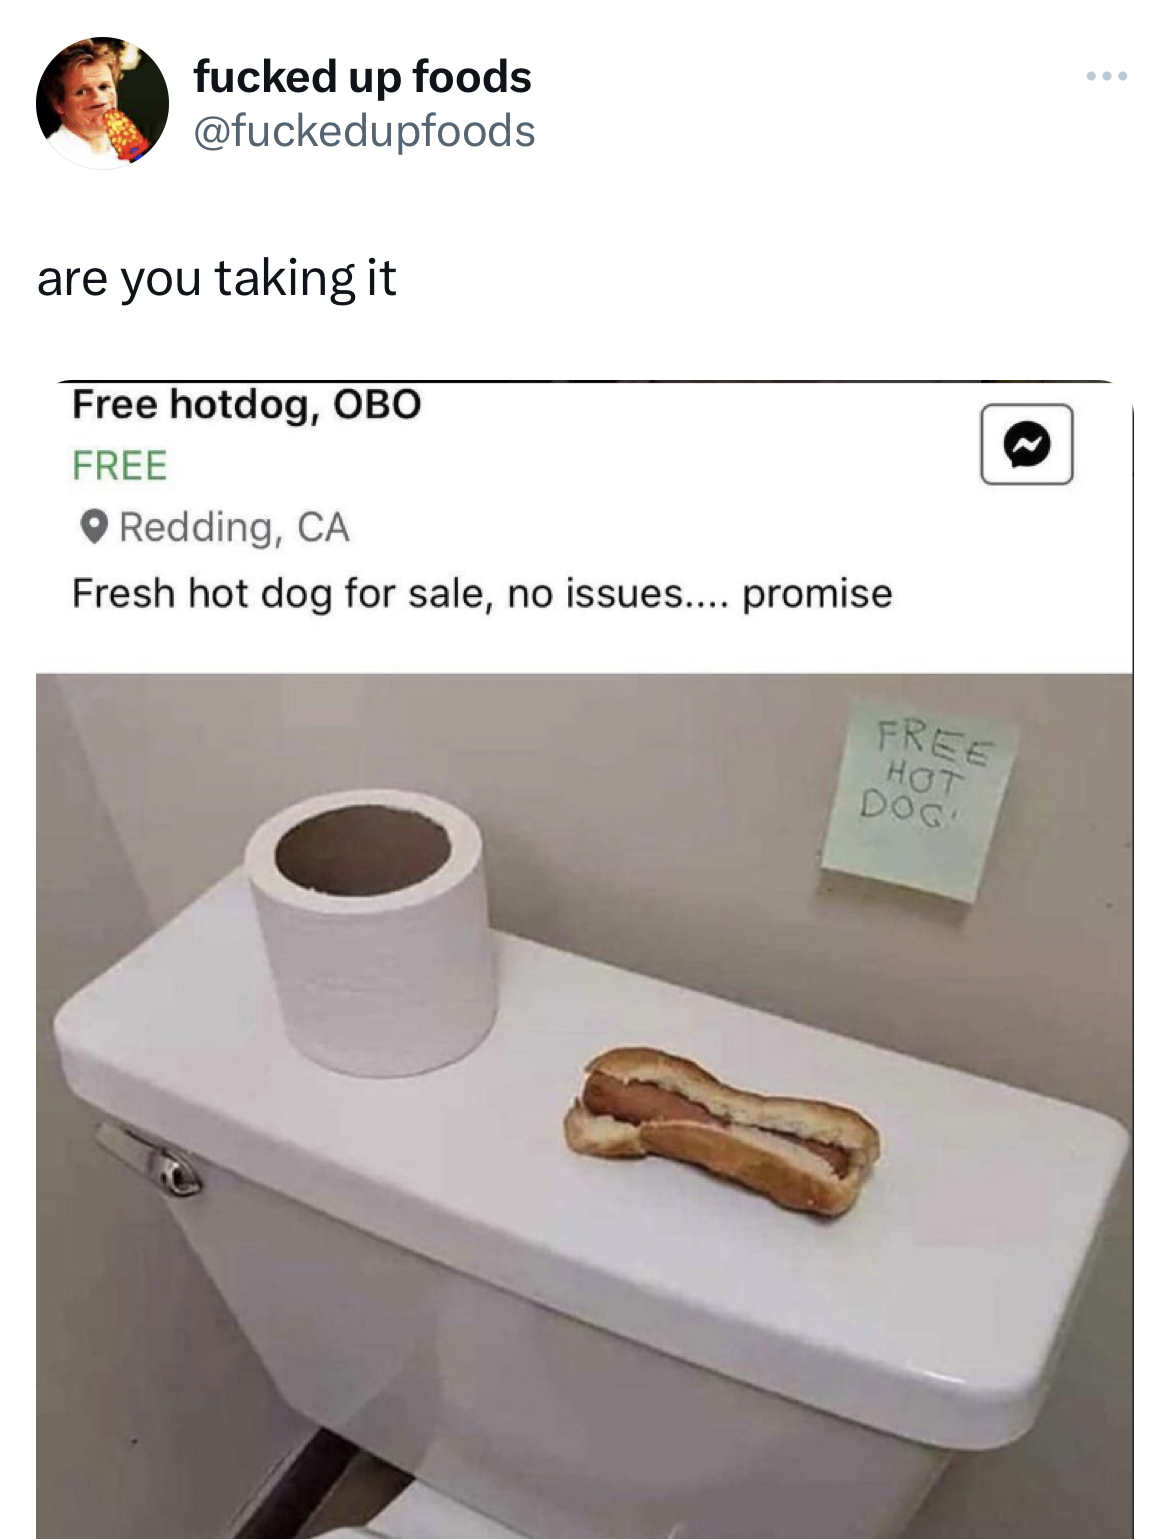 hall of fame tweets -tap - fucked up foods are you taking it Free hotdog, Obo Free Redding, Ca Fresh hot dog for sale, no issues.... promise Free Hot Dog